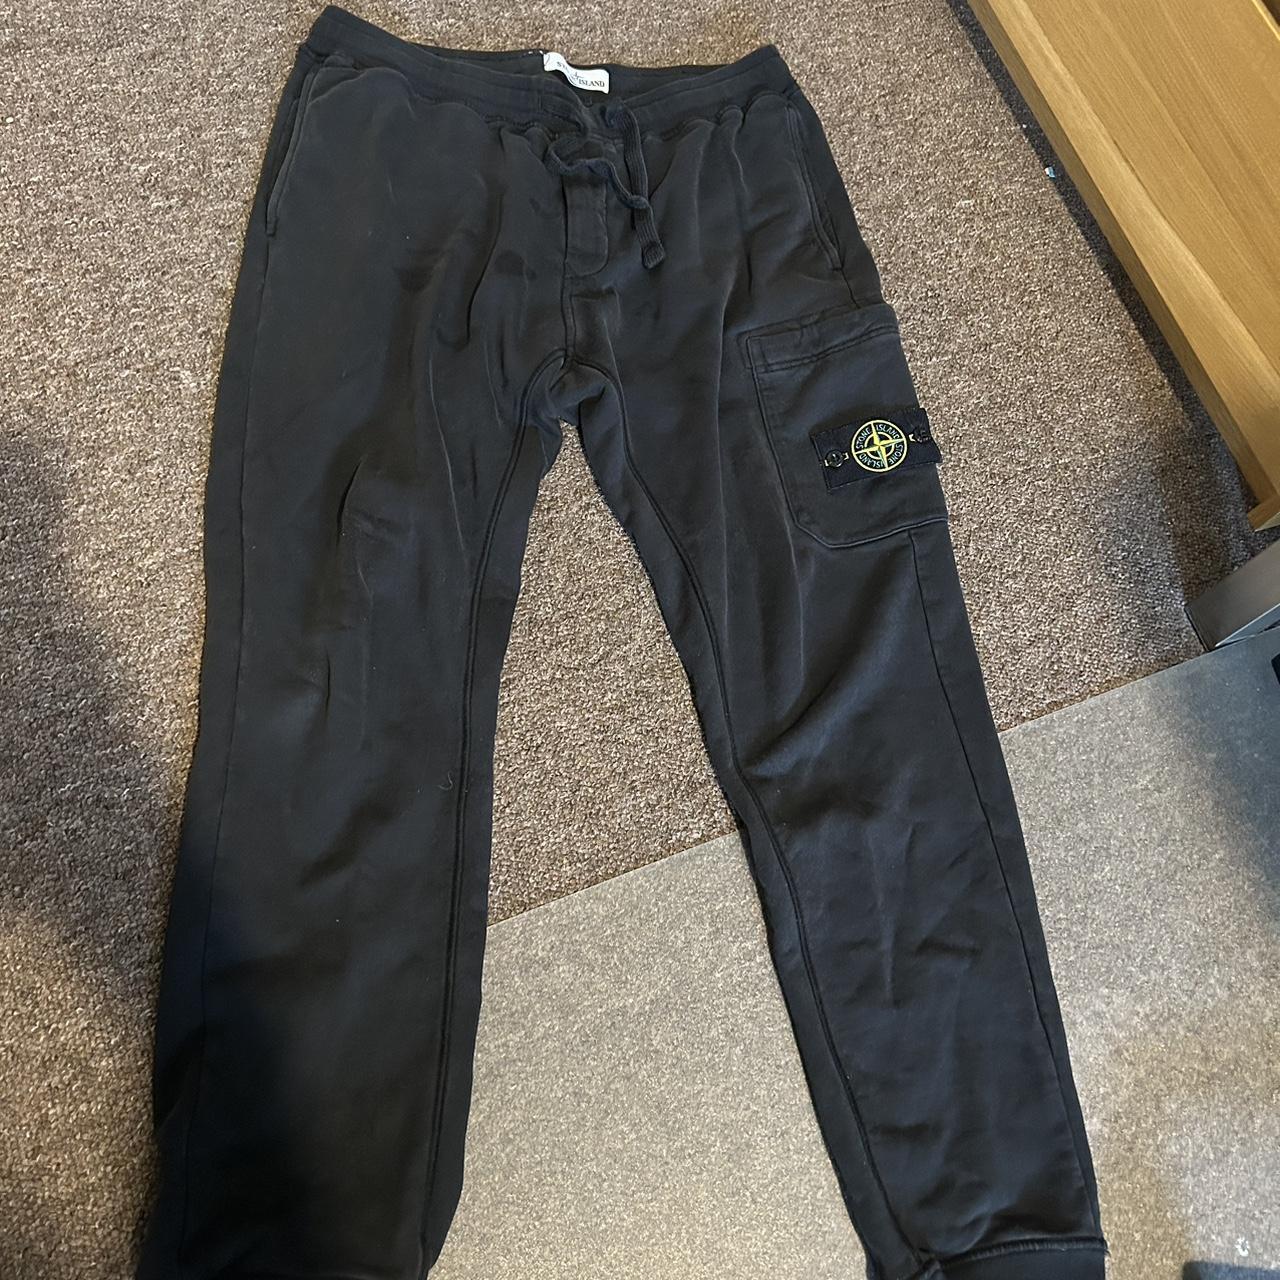 Stone island tracksuits bottoms but they wear and... - Depop